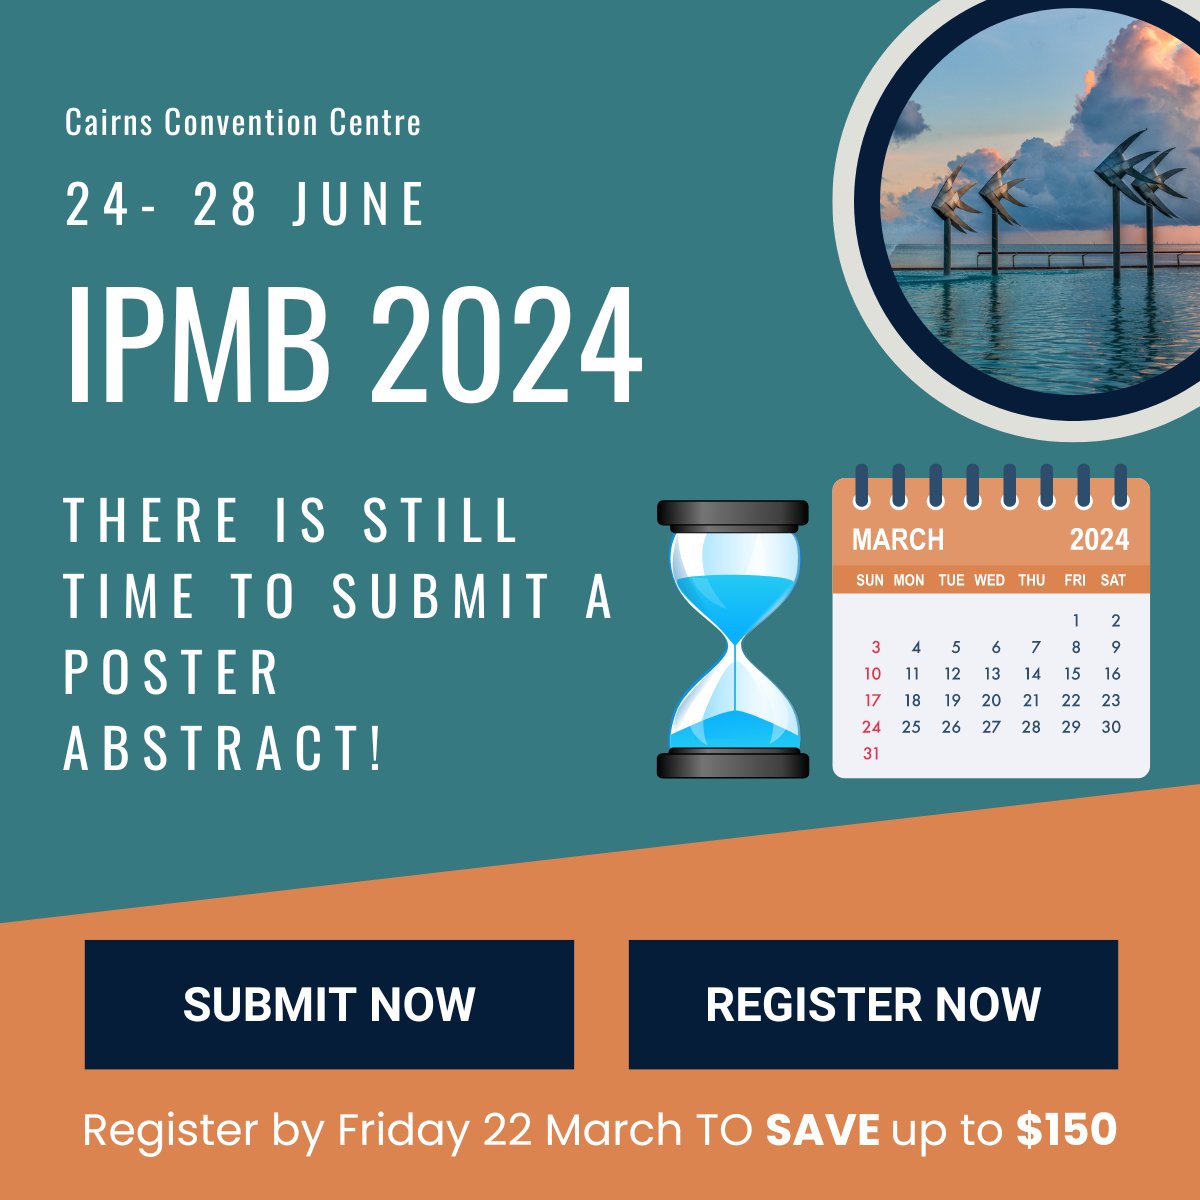 Submissions for #IPMB2024 poster presentations remain open! Submit now and don’t forget to register by Friday 22 March to save up to $150! Visit ipmb2024.org for more information.